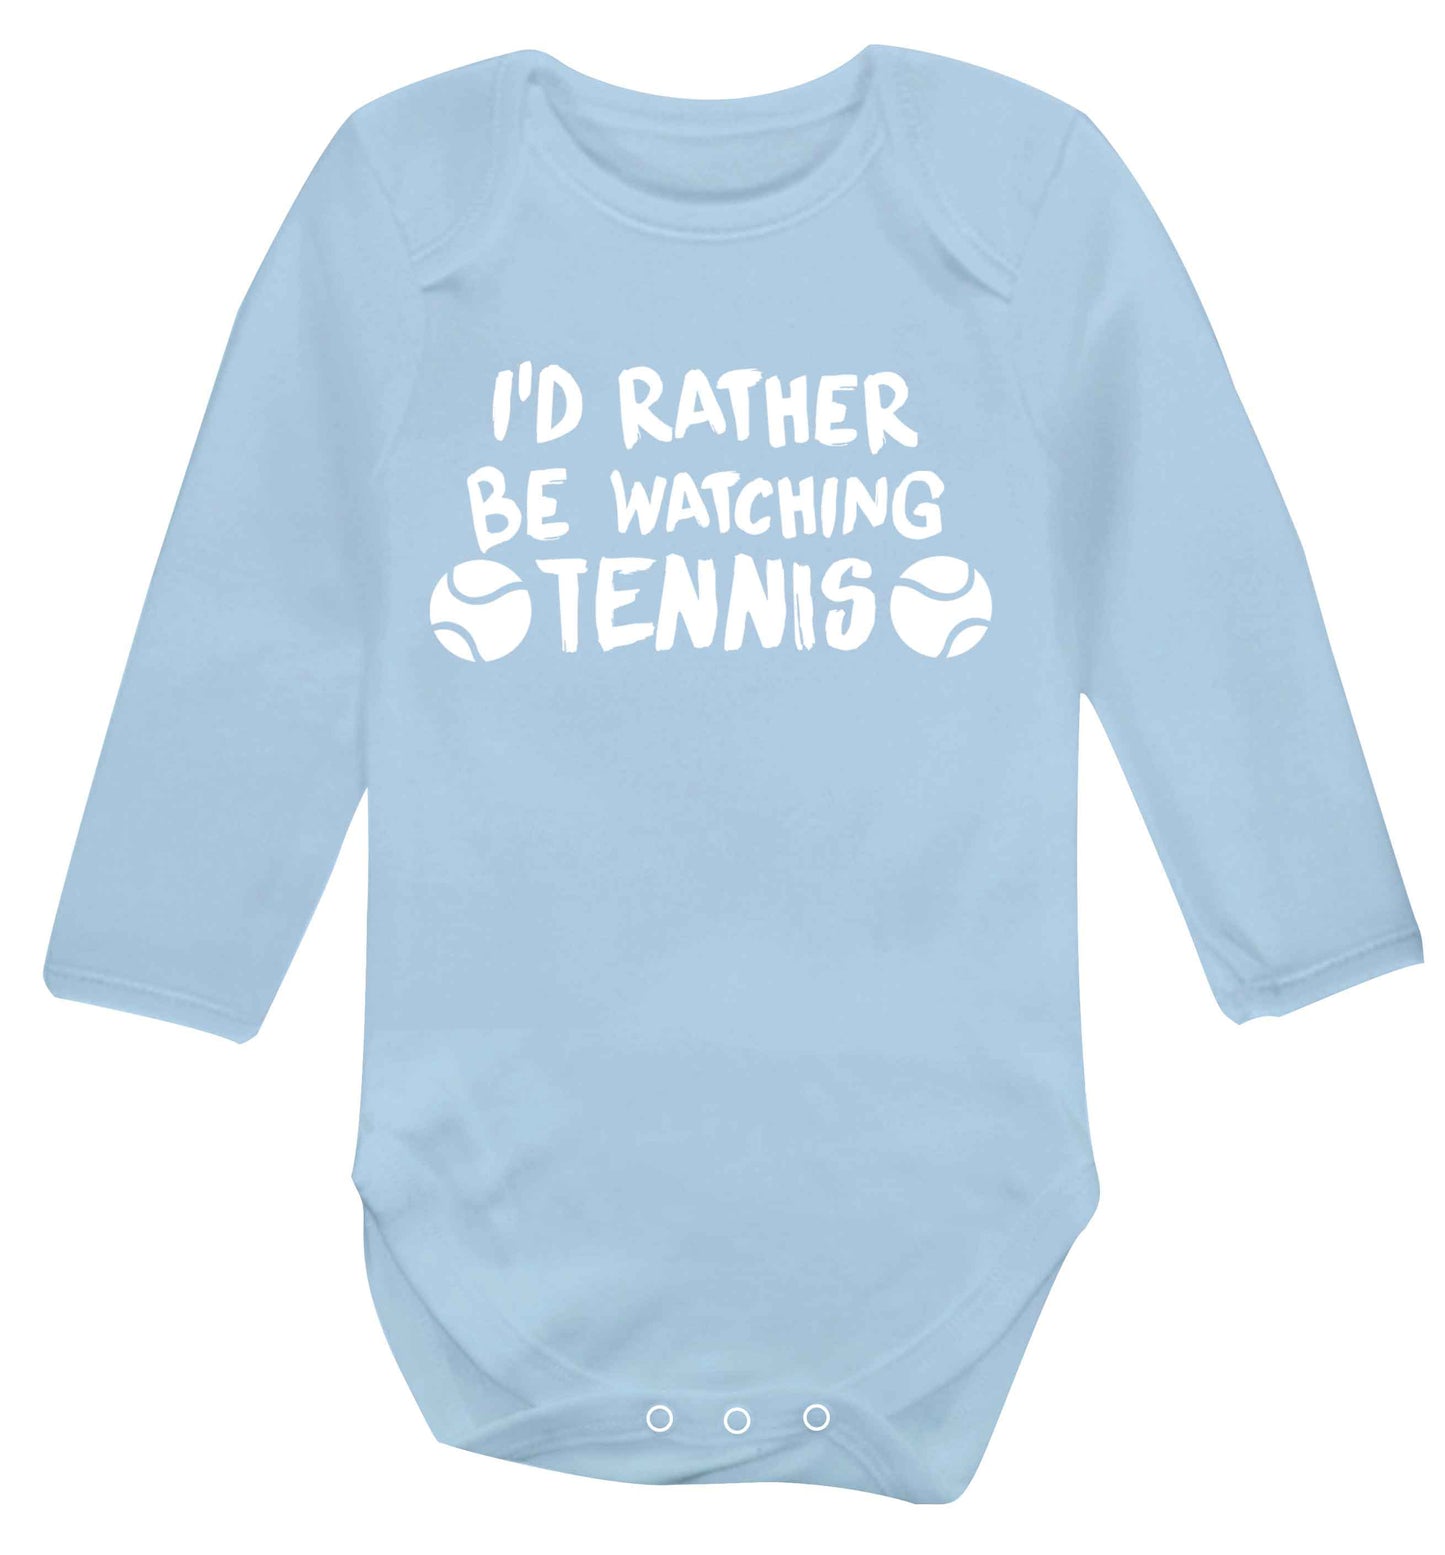 I'd rather be watching the tennis Baby Vest long sleeved pale blue 6-12 months